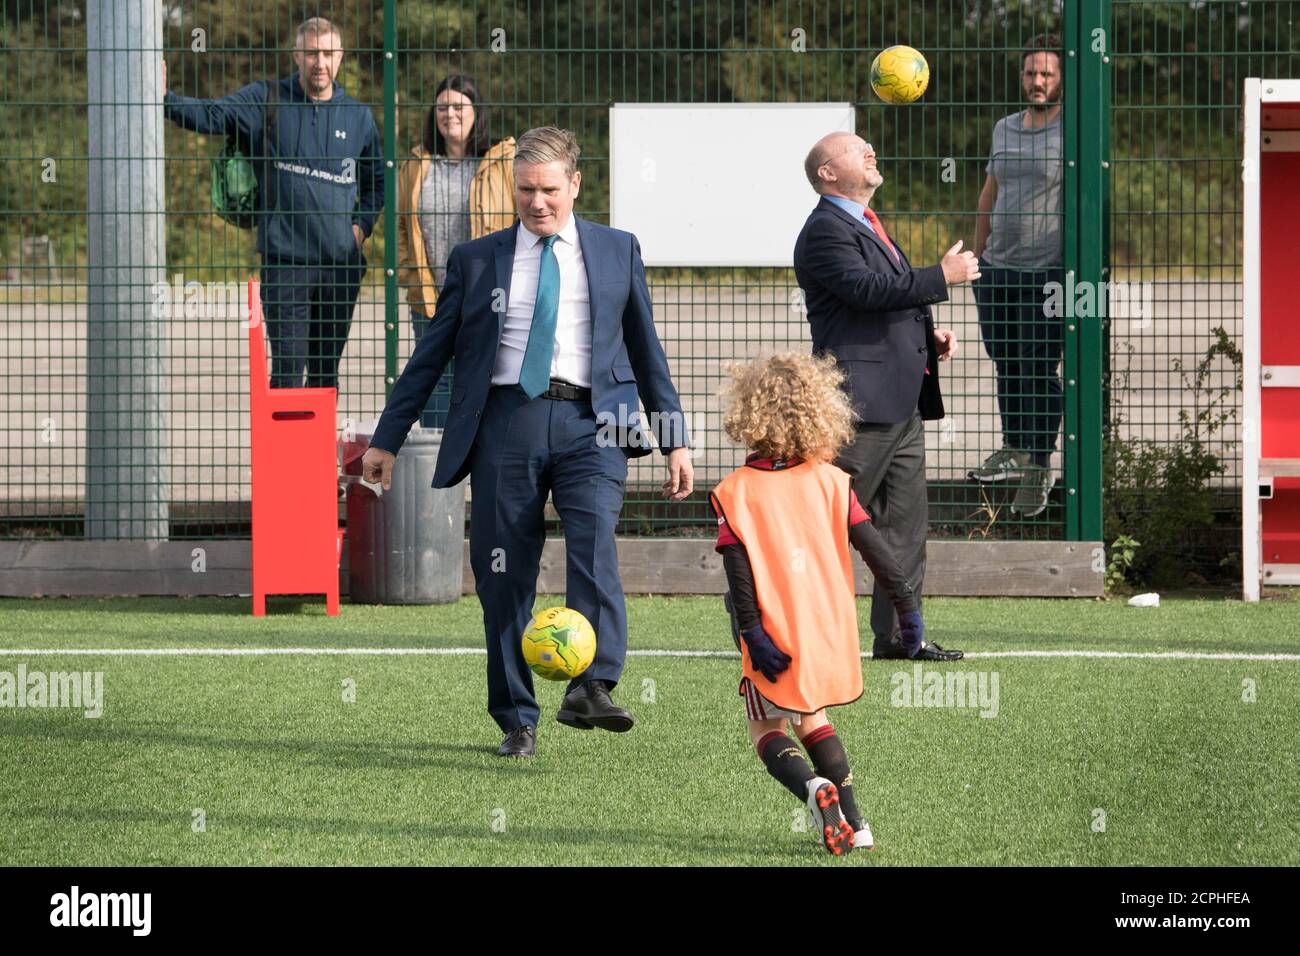 Labour Leader Sir Keir Starmer (left) with MP Liam Byrne playing football during a visit to Walsall football club to learn about their community work during the pandemic and discuss efforts to reopen sports stadiums in a Covid-secure way. Stock Photo